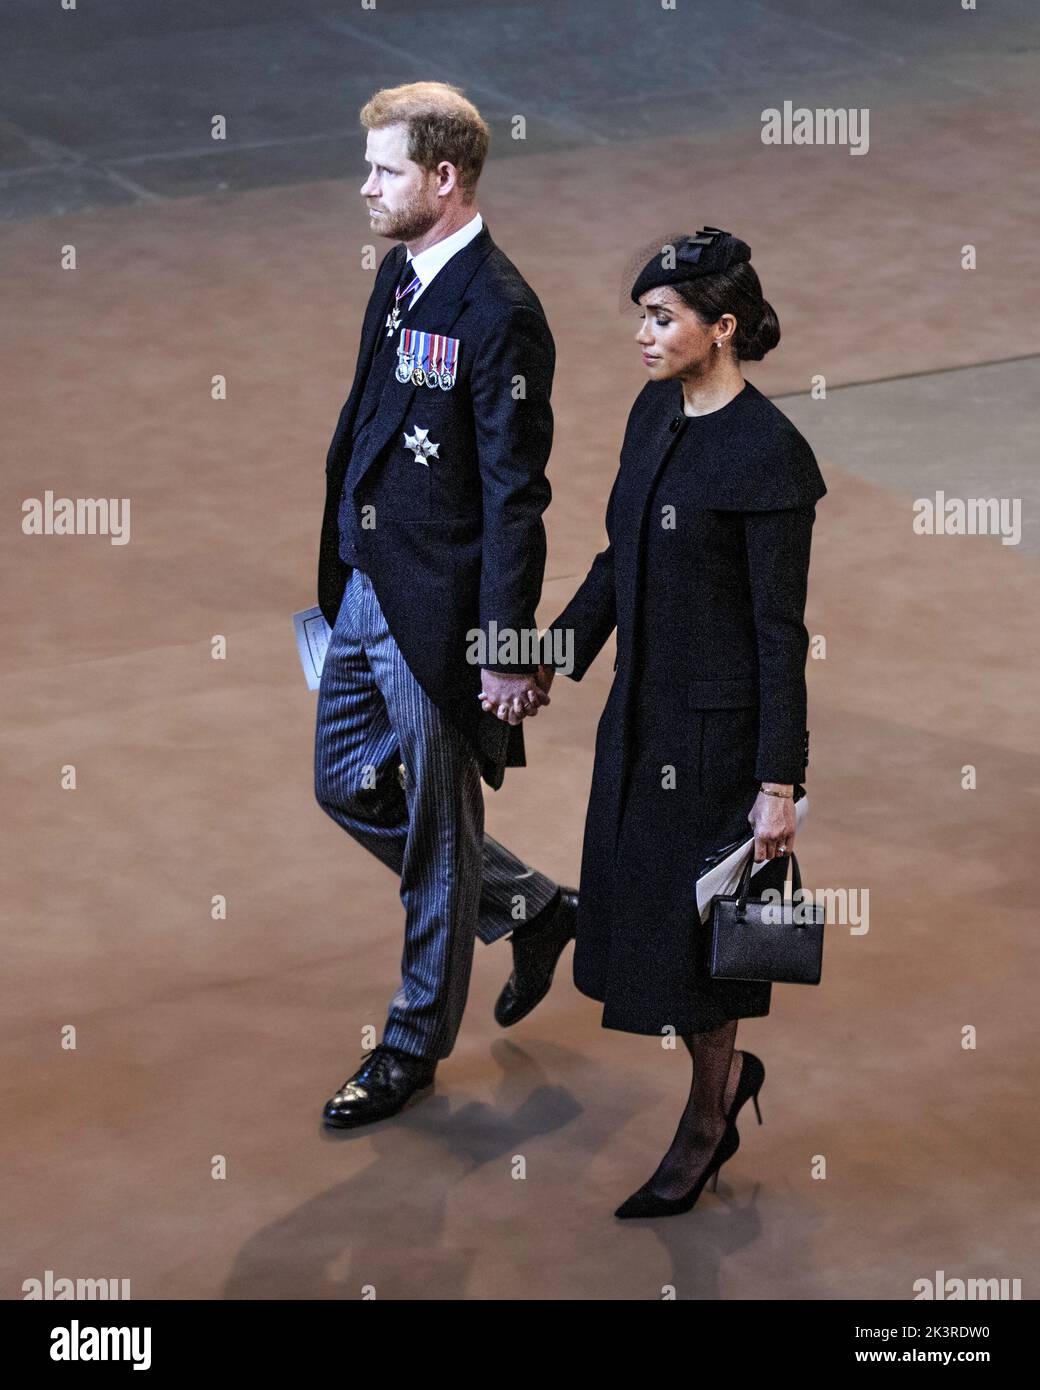 Prince Harry and Meghan Markle hold hands, Duke and Duchess of Sussex depart service for the arrival of Queen Elizabeth II coffin at Palace of Westmin Stock Photo